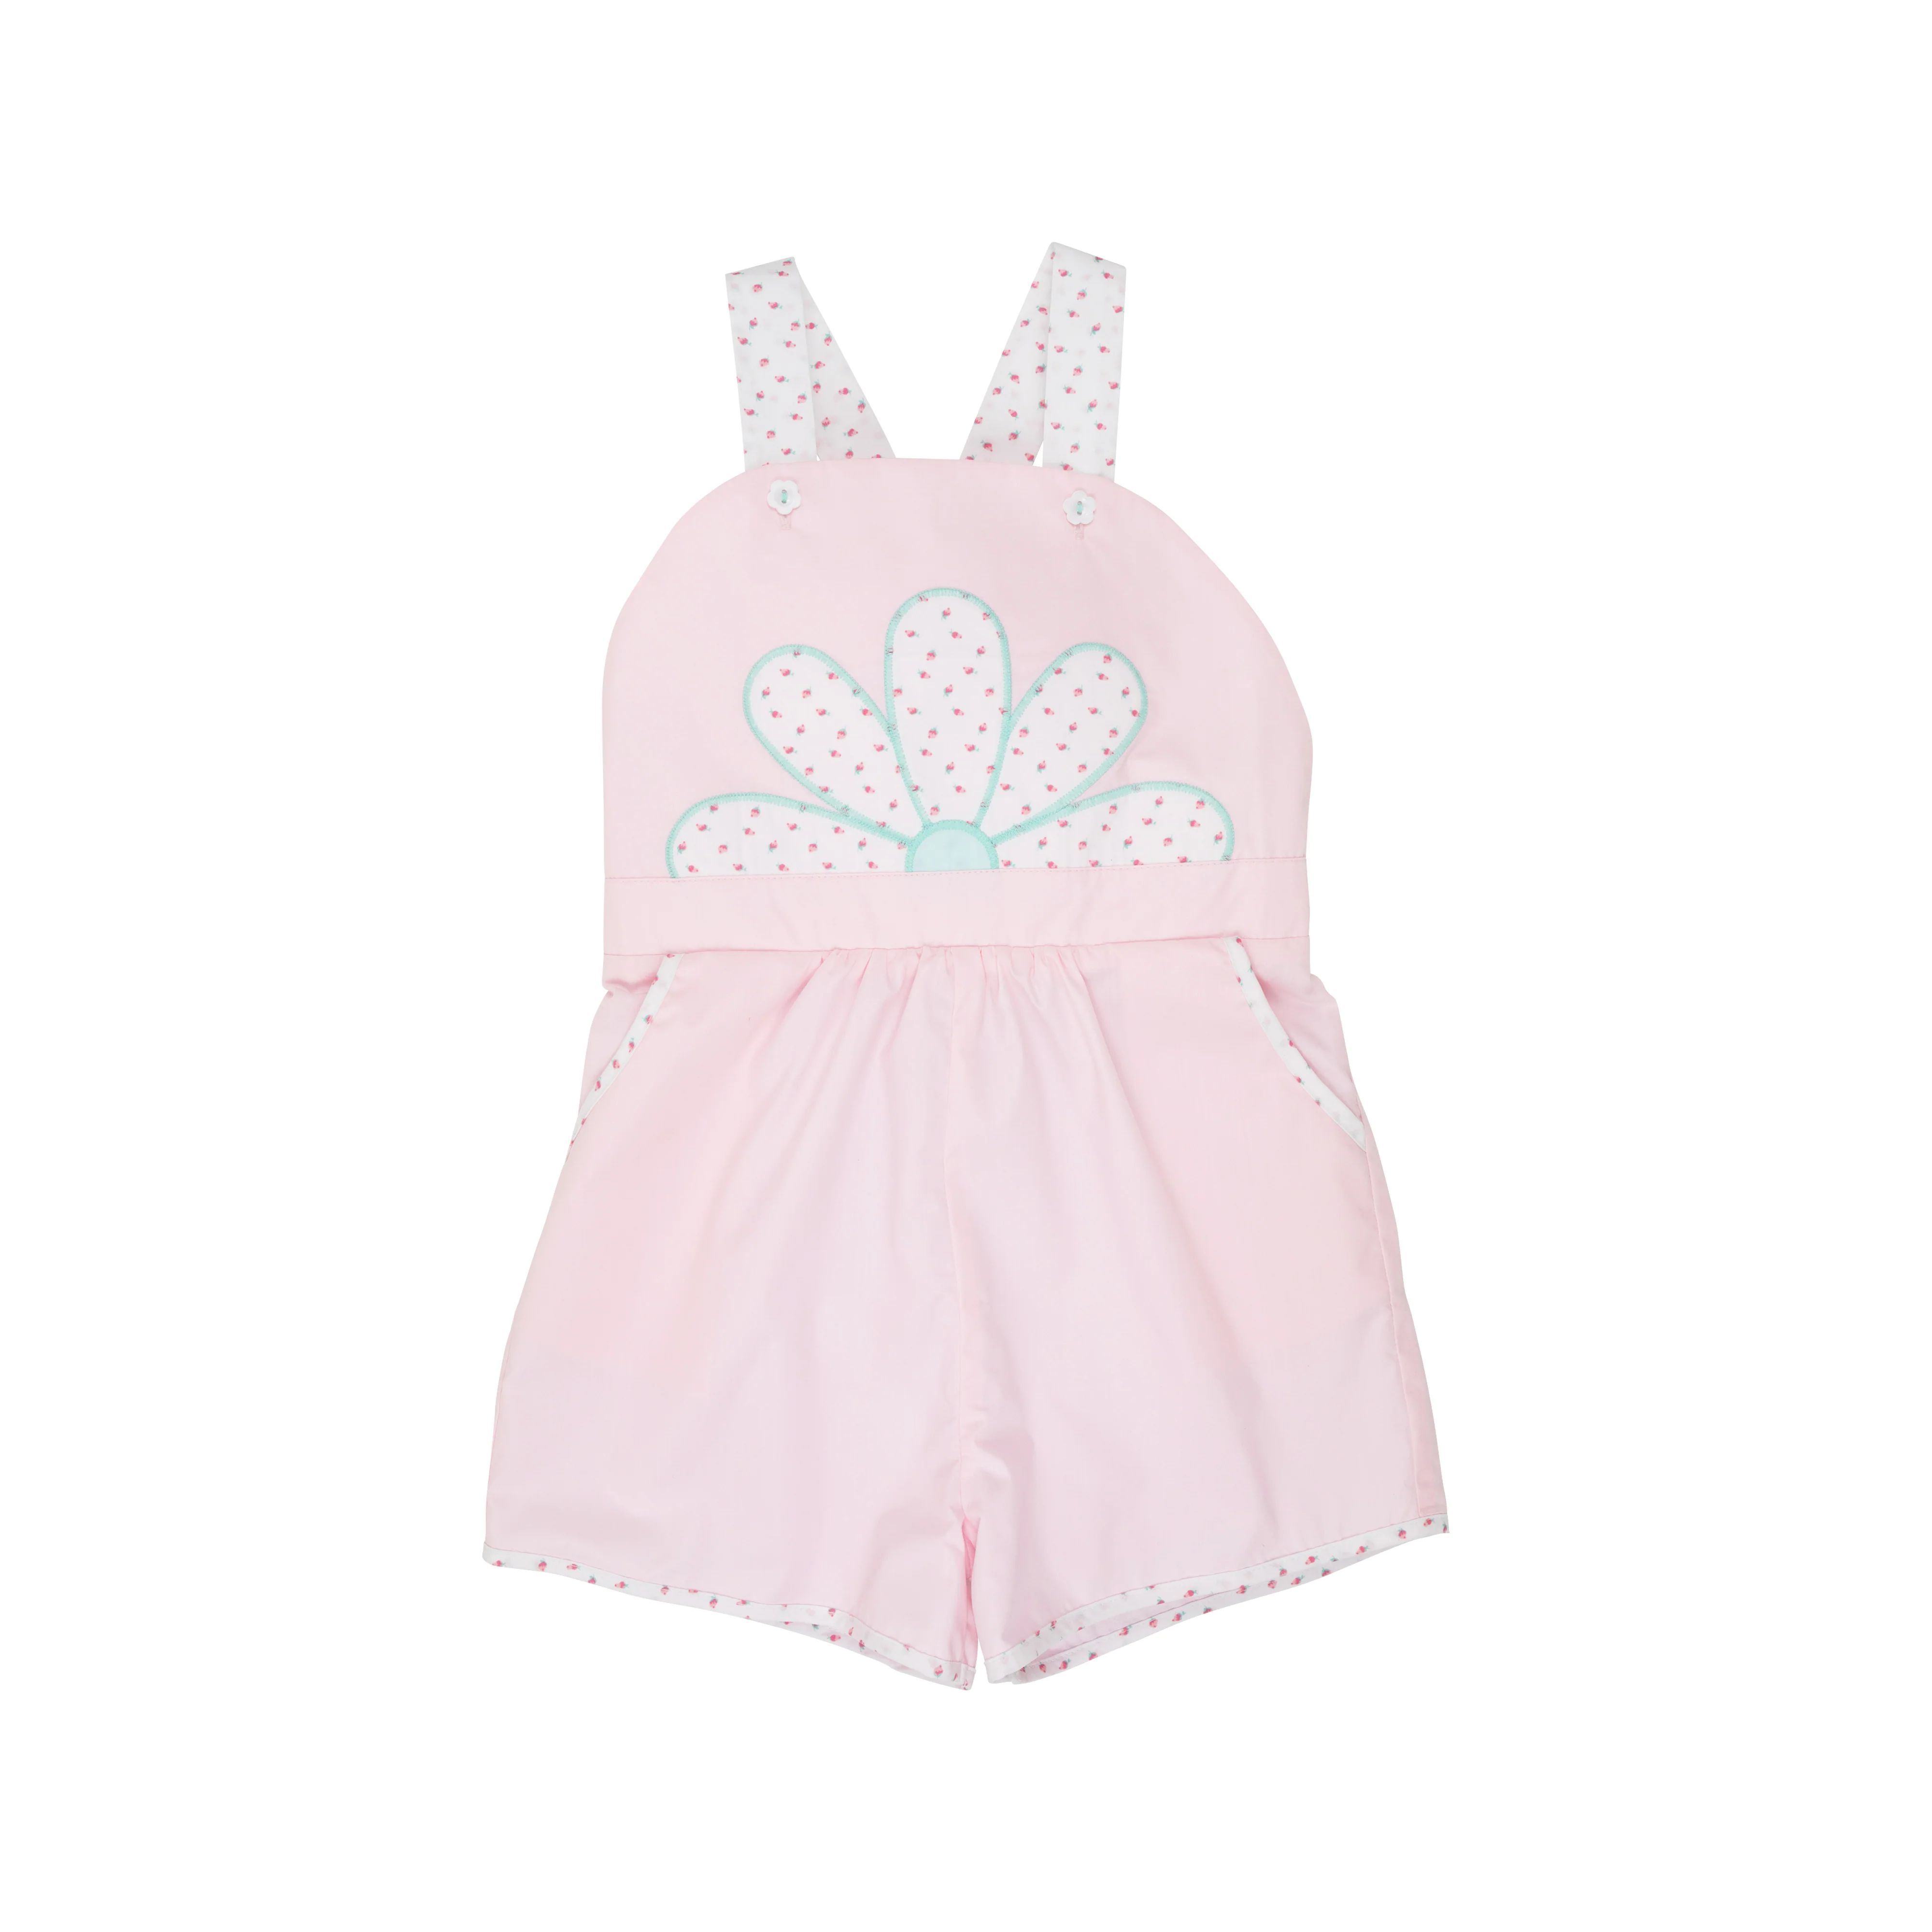 Ruthie Romper - Palm Beach Pink with Port Royal Rosebud | The Beaufort Bonnet Company